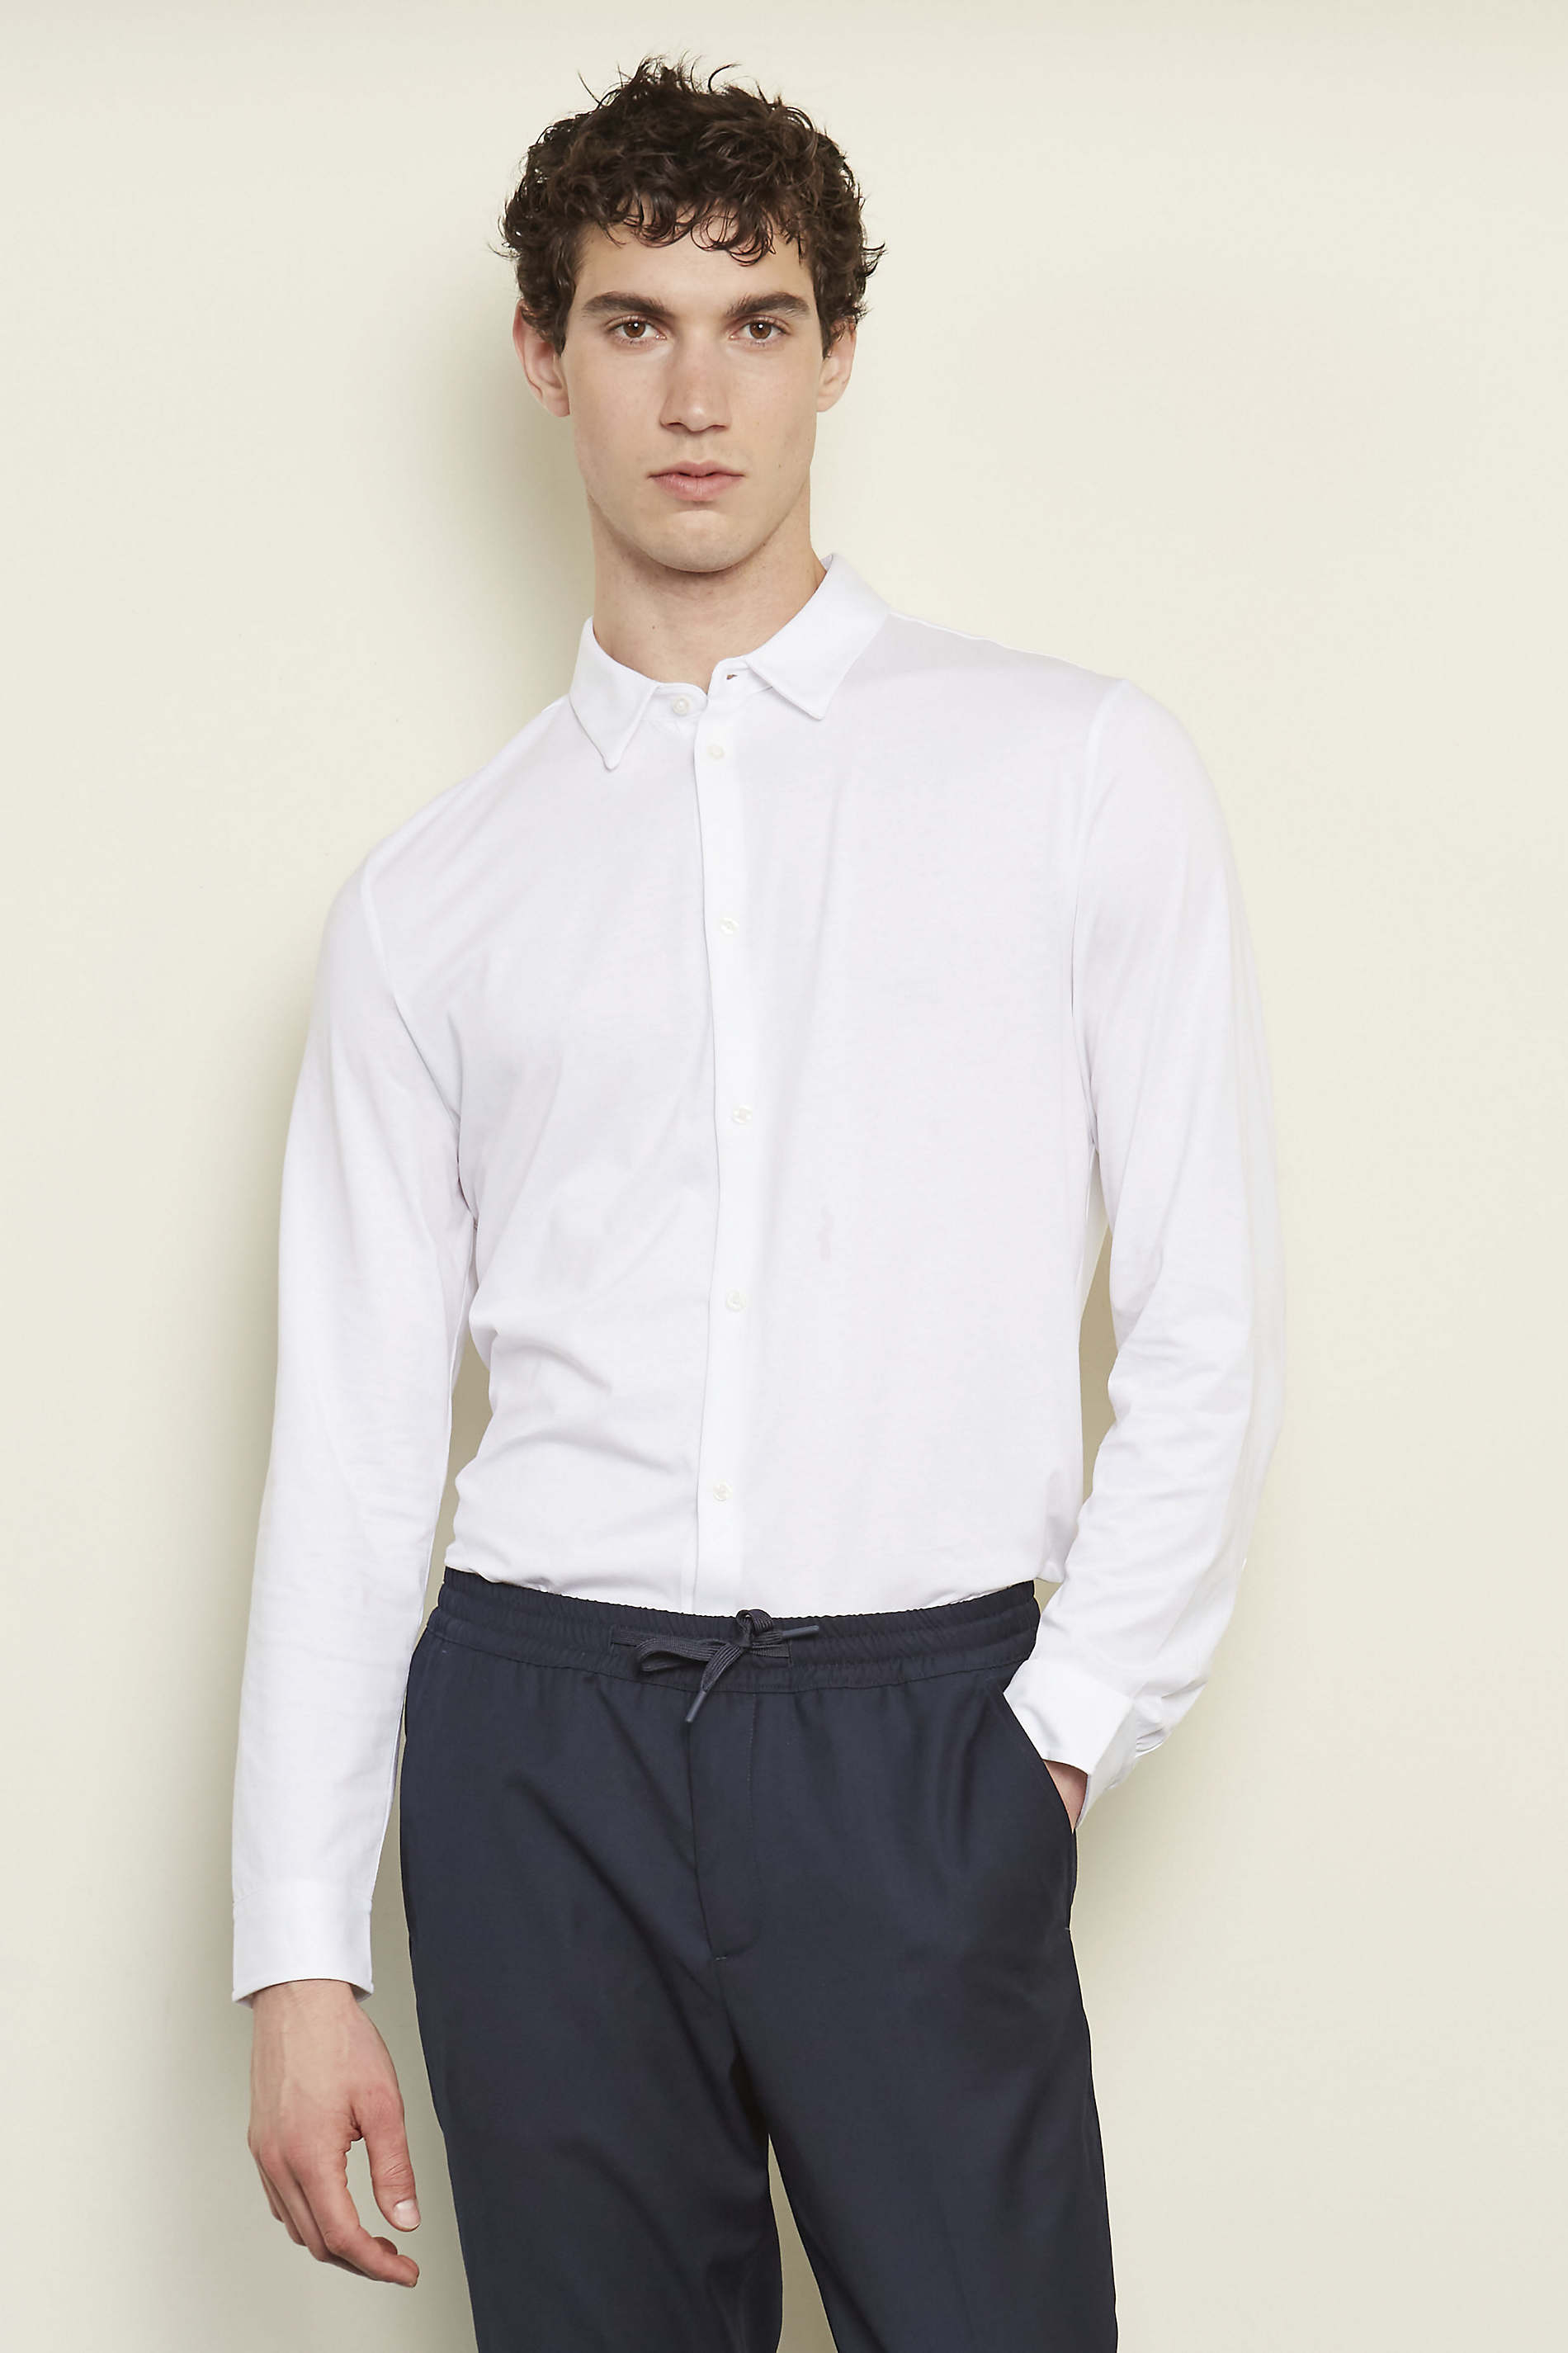 MEN'S MERCERISED JERSEY SHIRT<p>Made of premium cotton, this shirt is ideal for a casual and smart look. Its extremely smooth and soft jersey knit offer the comfort of a T-shirt and the elegance of a shirt.</p> NEOBLU BALTHAZAR MEN